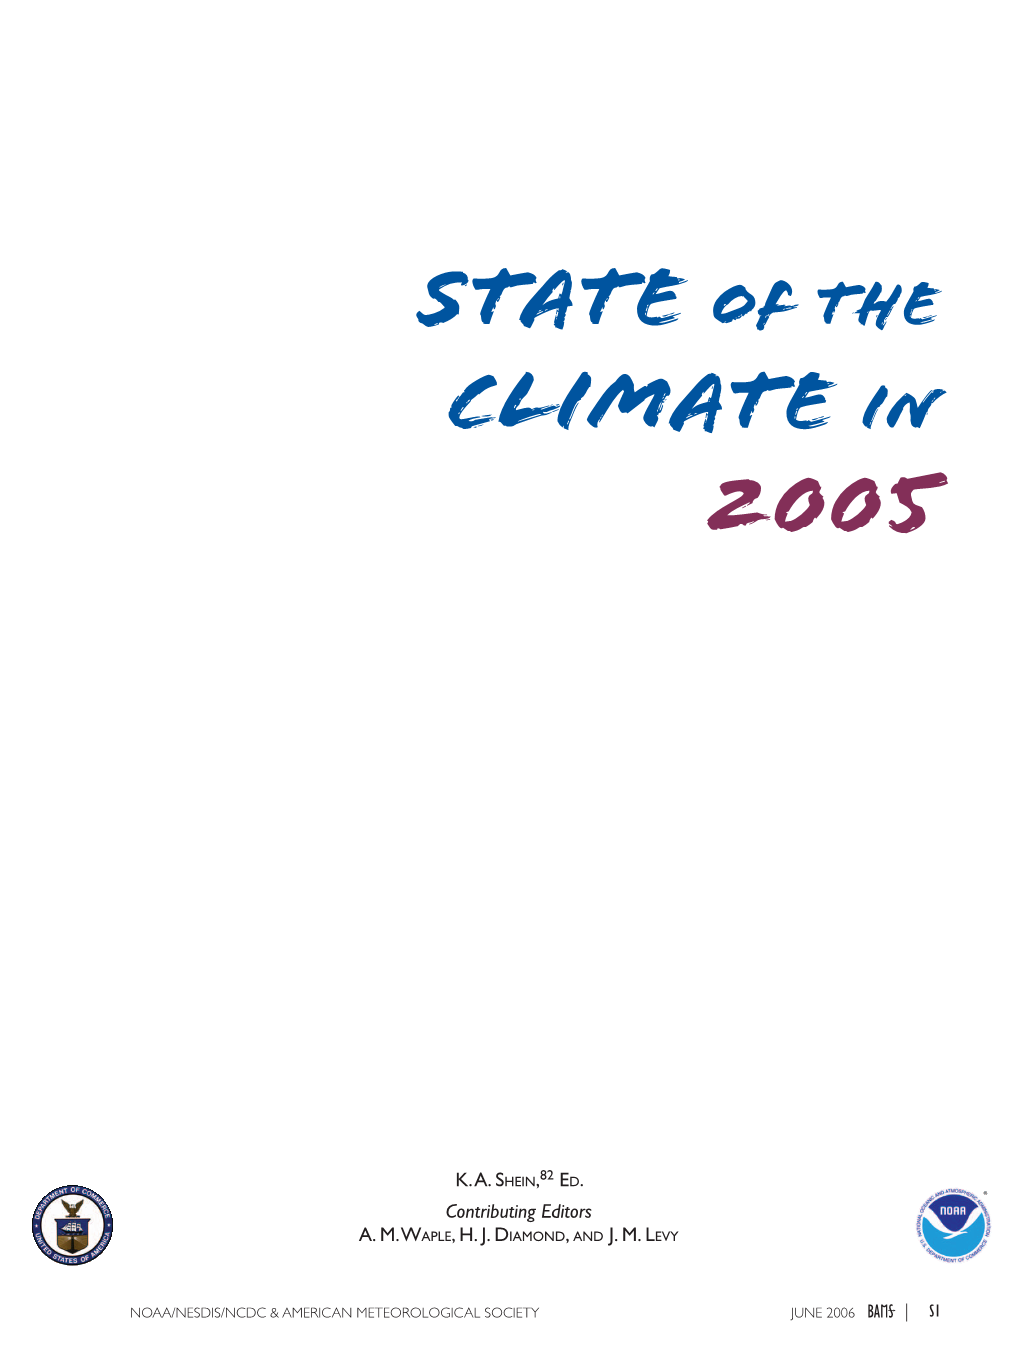 State of the Climate in 2005